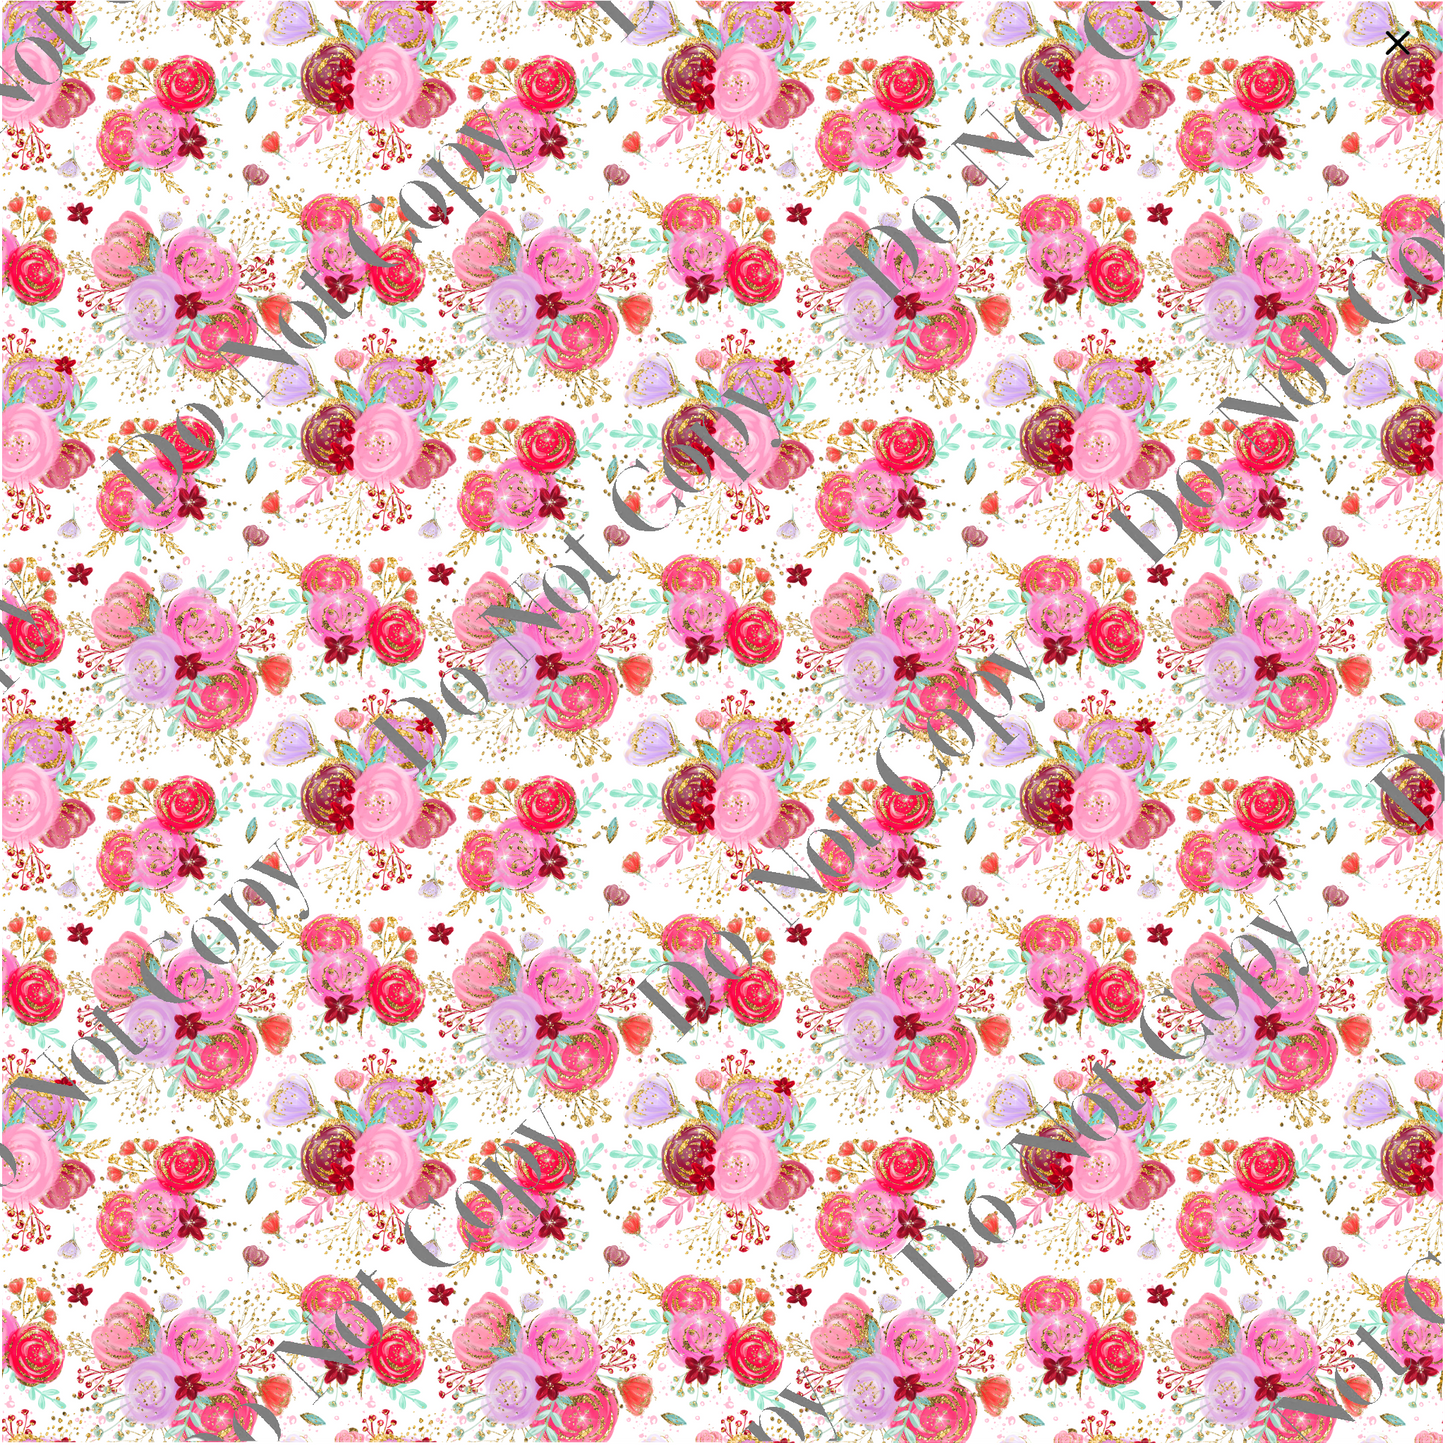 Patterned Vinyl - Pink, Lilac & Red with Gold Floral